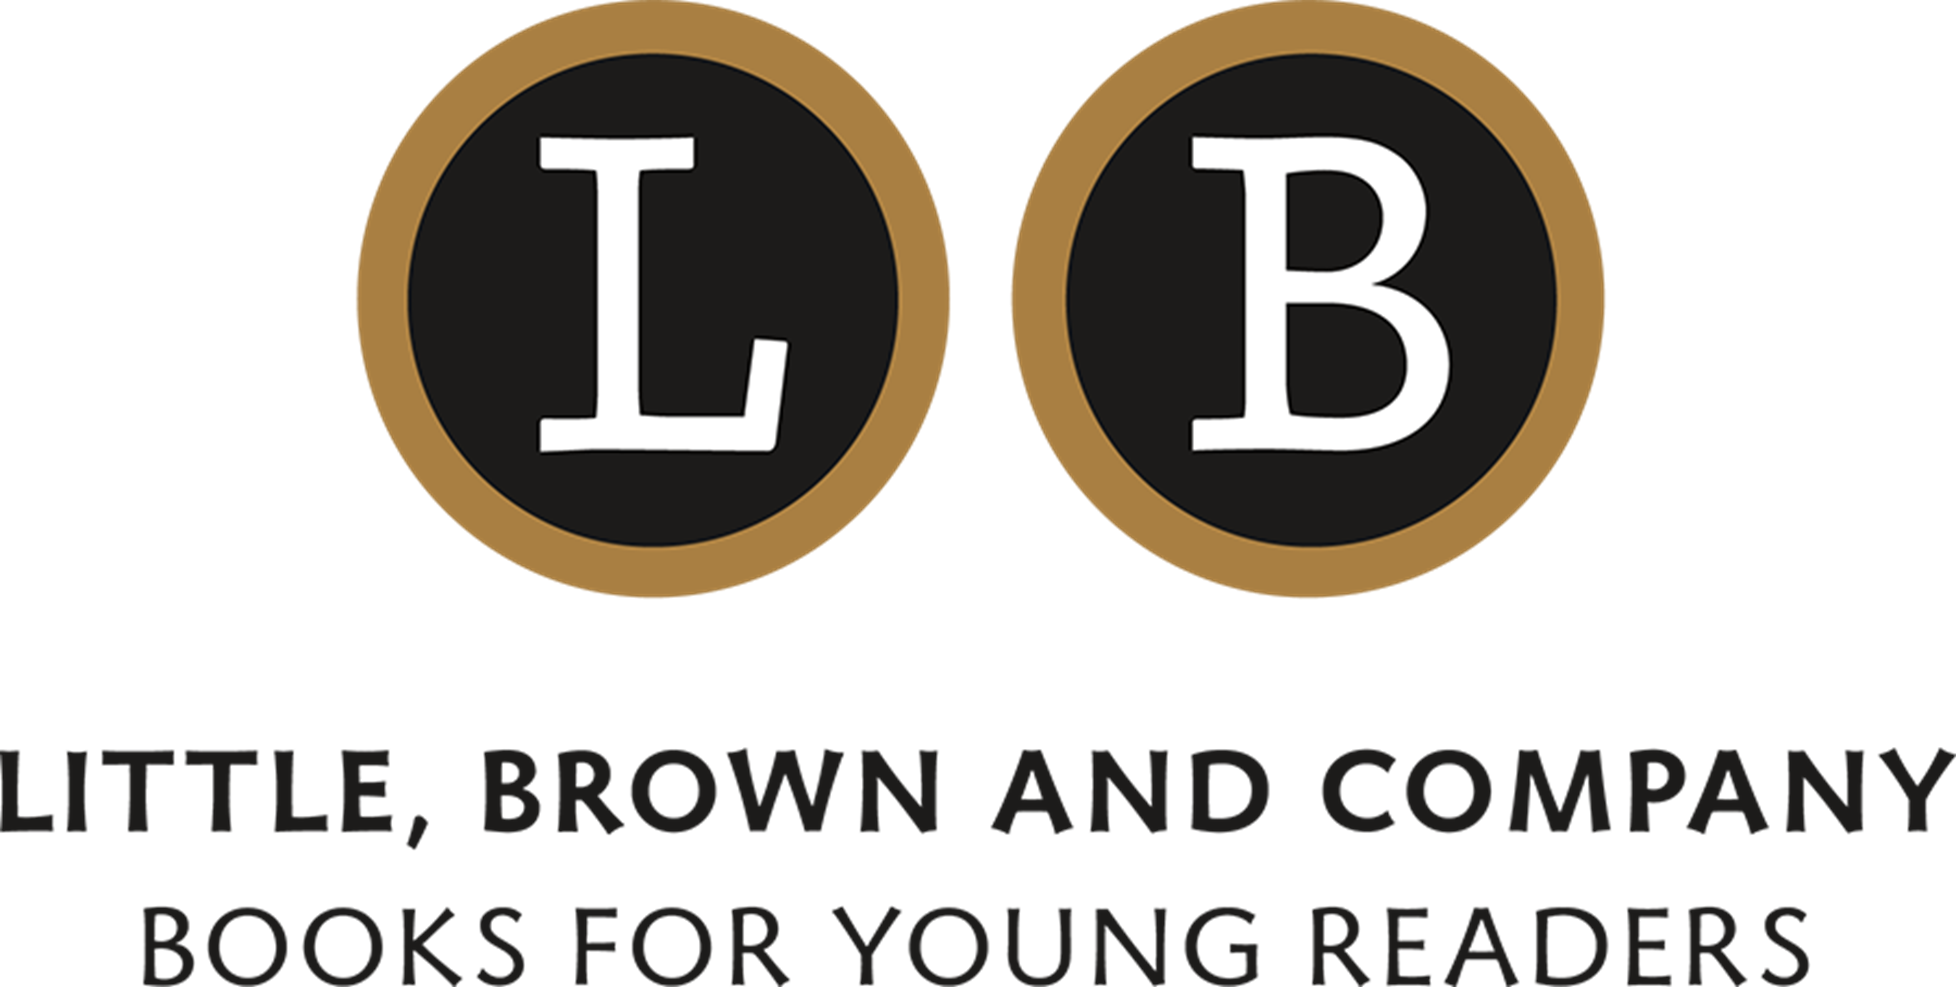 Little, Brown and Company Sponsor Logo